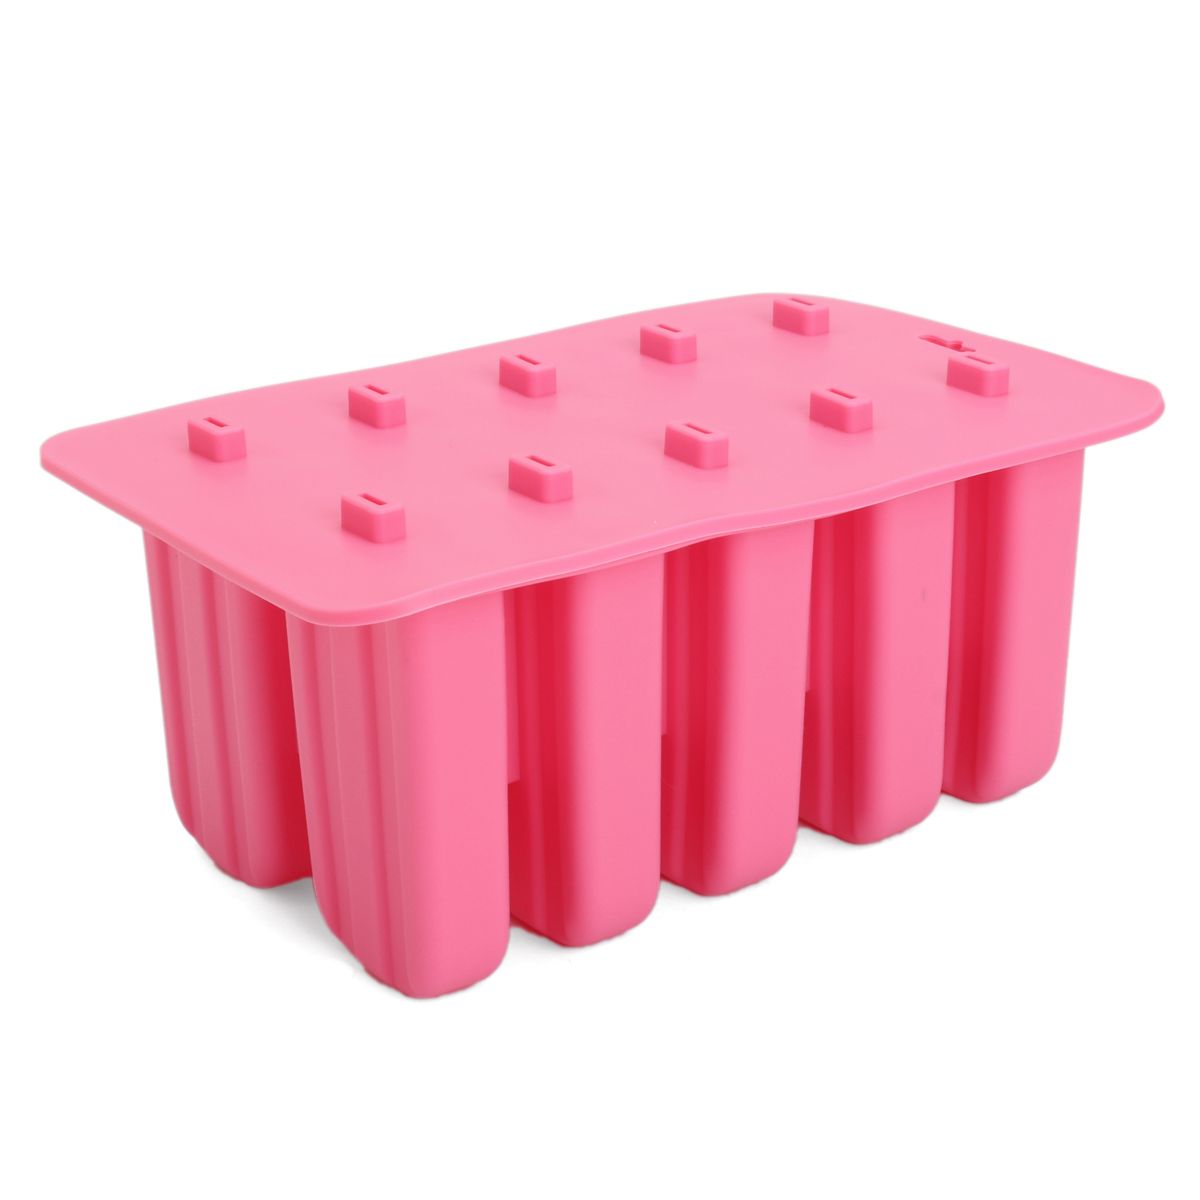 10-Cavity-Frozen-Ice-Cream-Pop-Mold-Maker-Lolly-Silicone-Mould-Tray-Pan-Kitchen-DIY-Stick-1377072